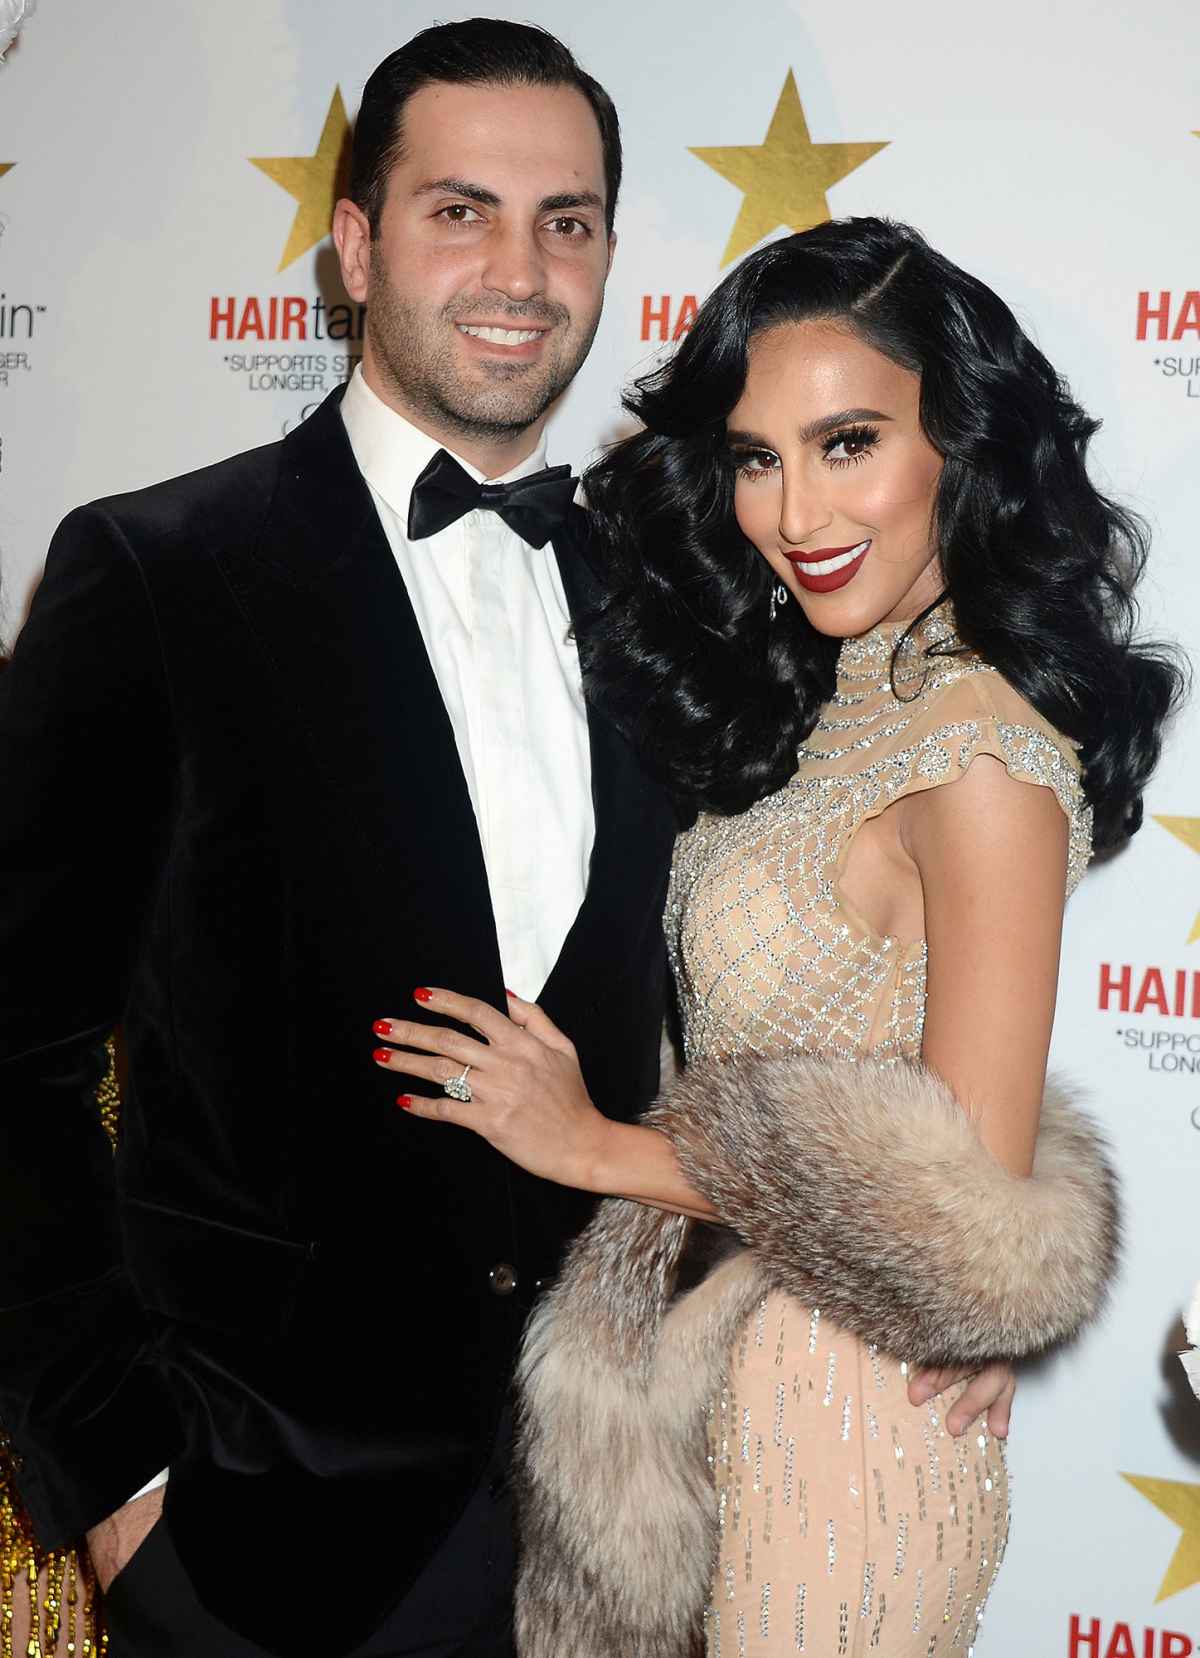 Shahs of Sunset's Lilly Ghalichi Is Pregnant With 2nd Child